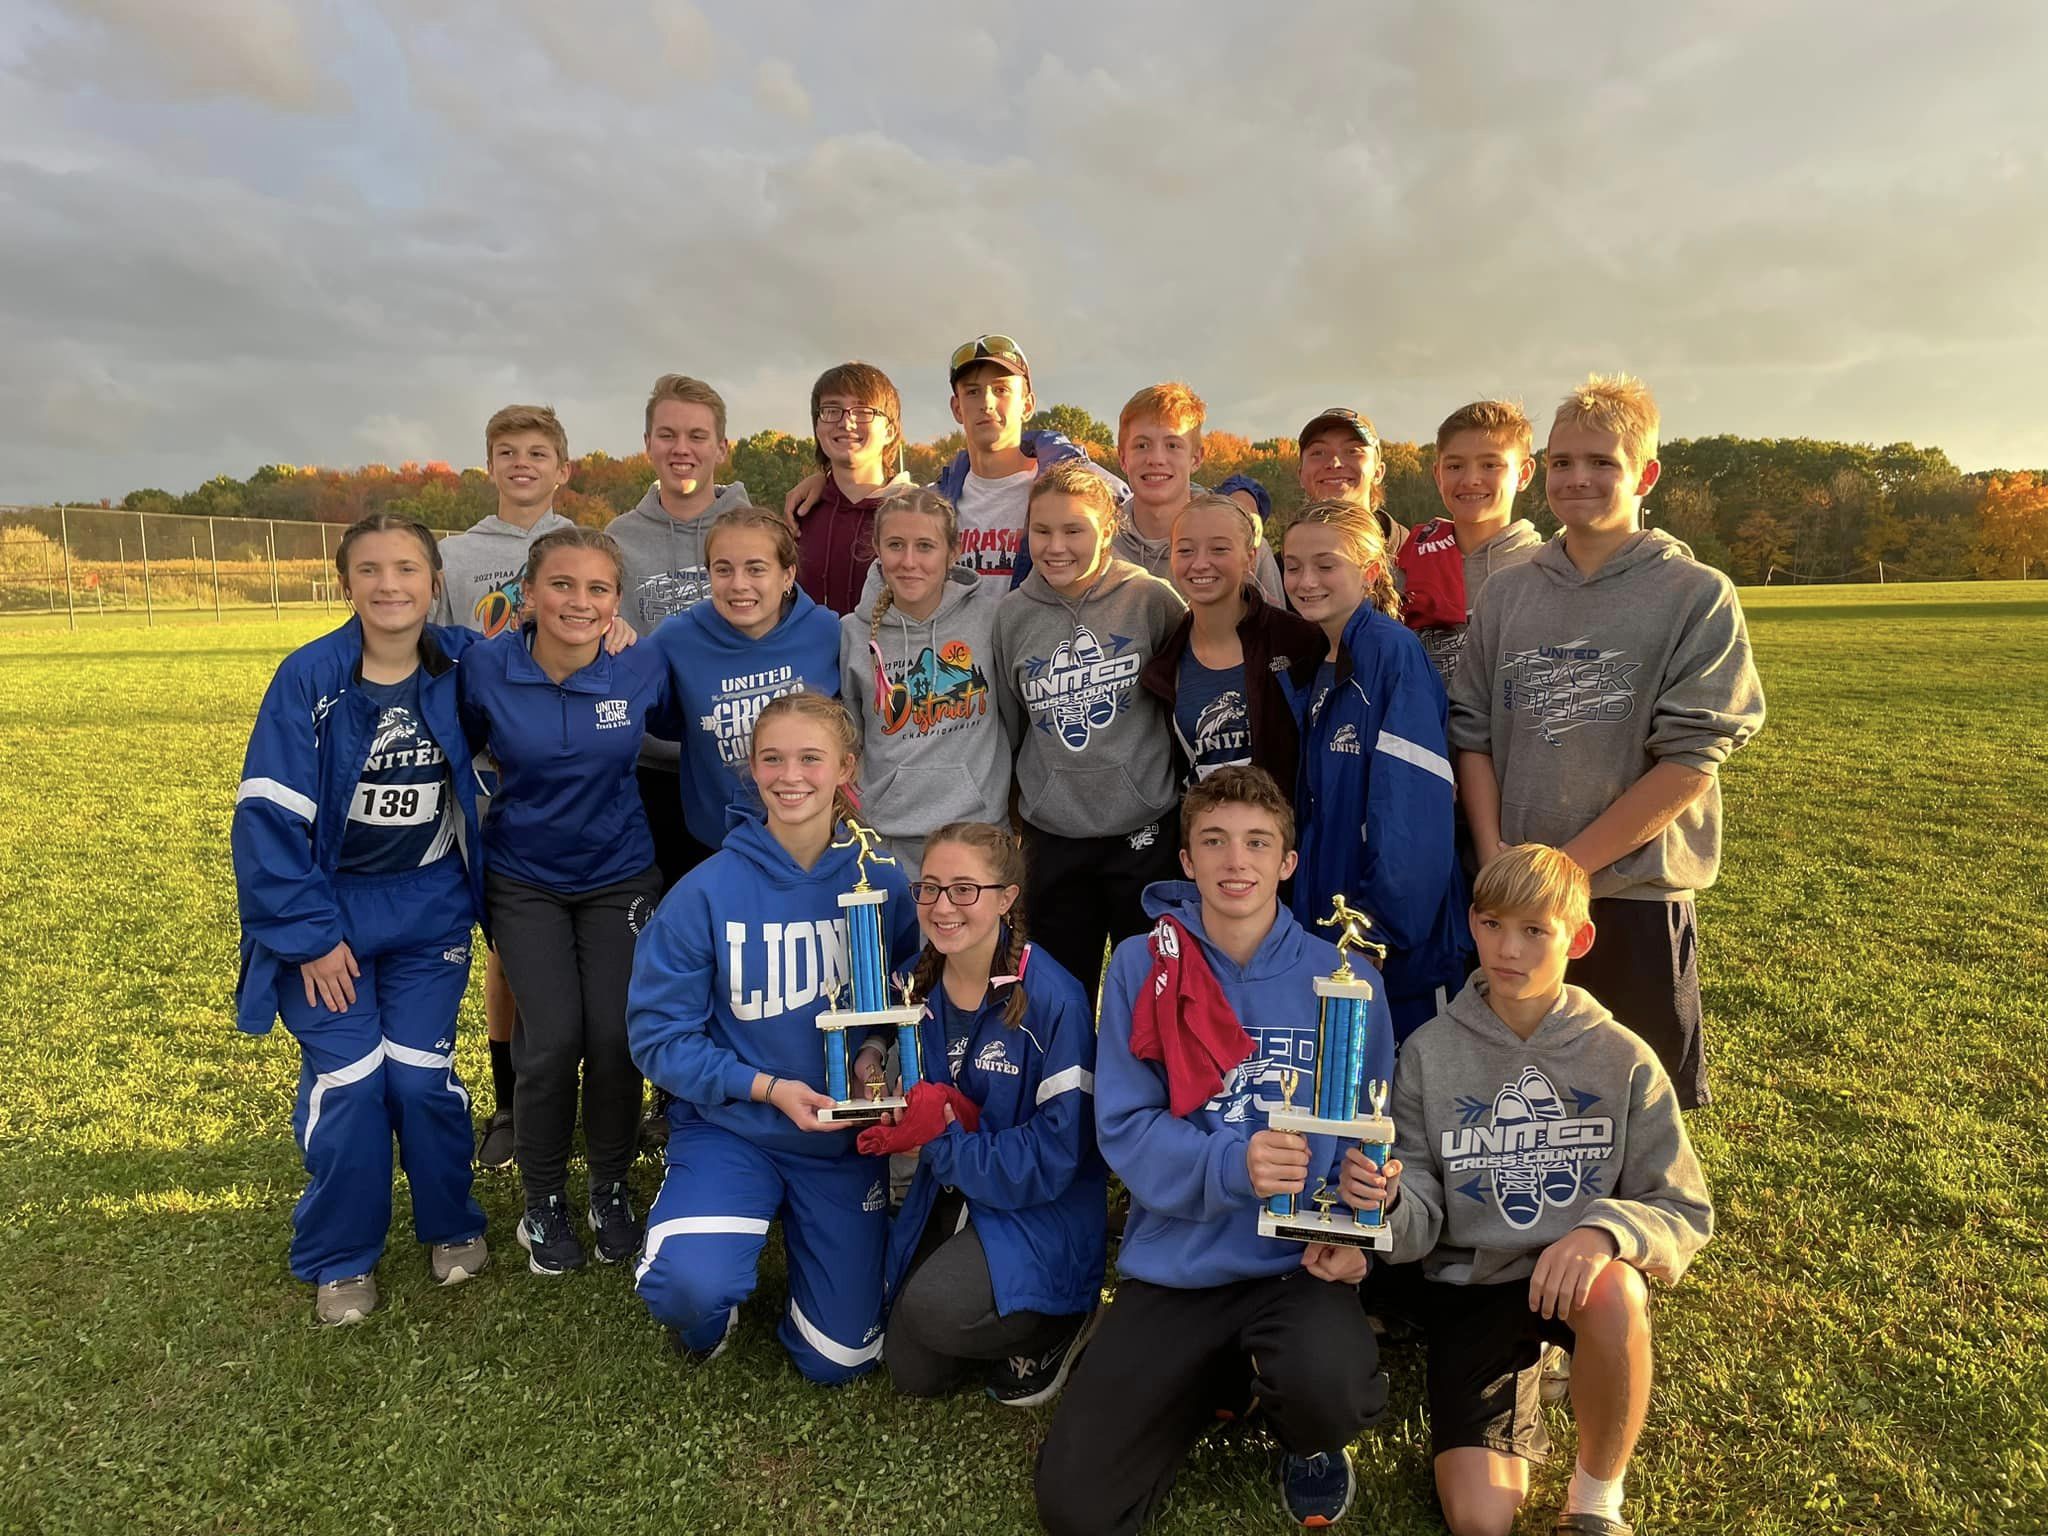 Both United Cross Country Teams Place 2nd at The Indiana County Championships